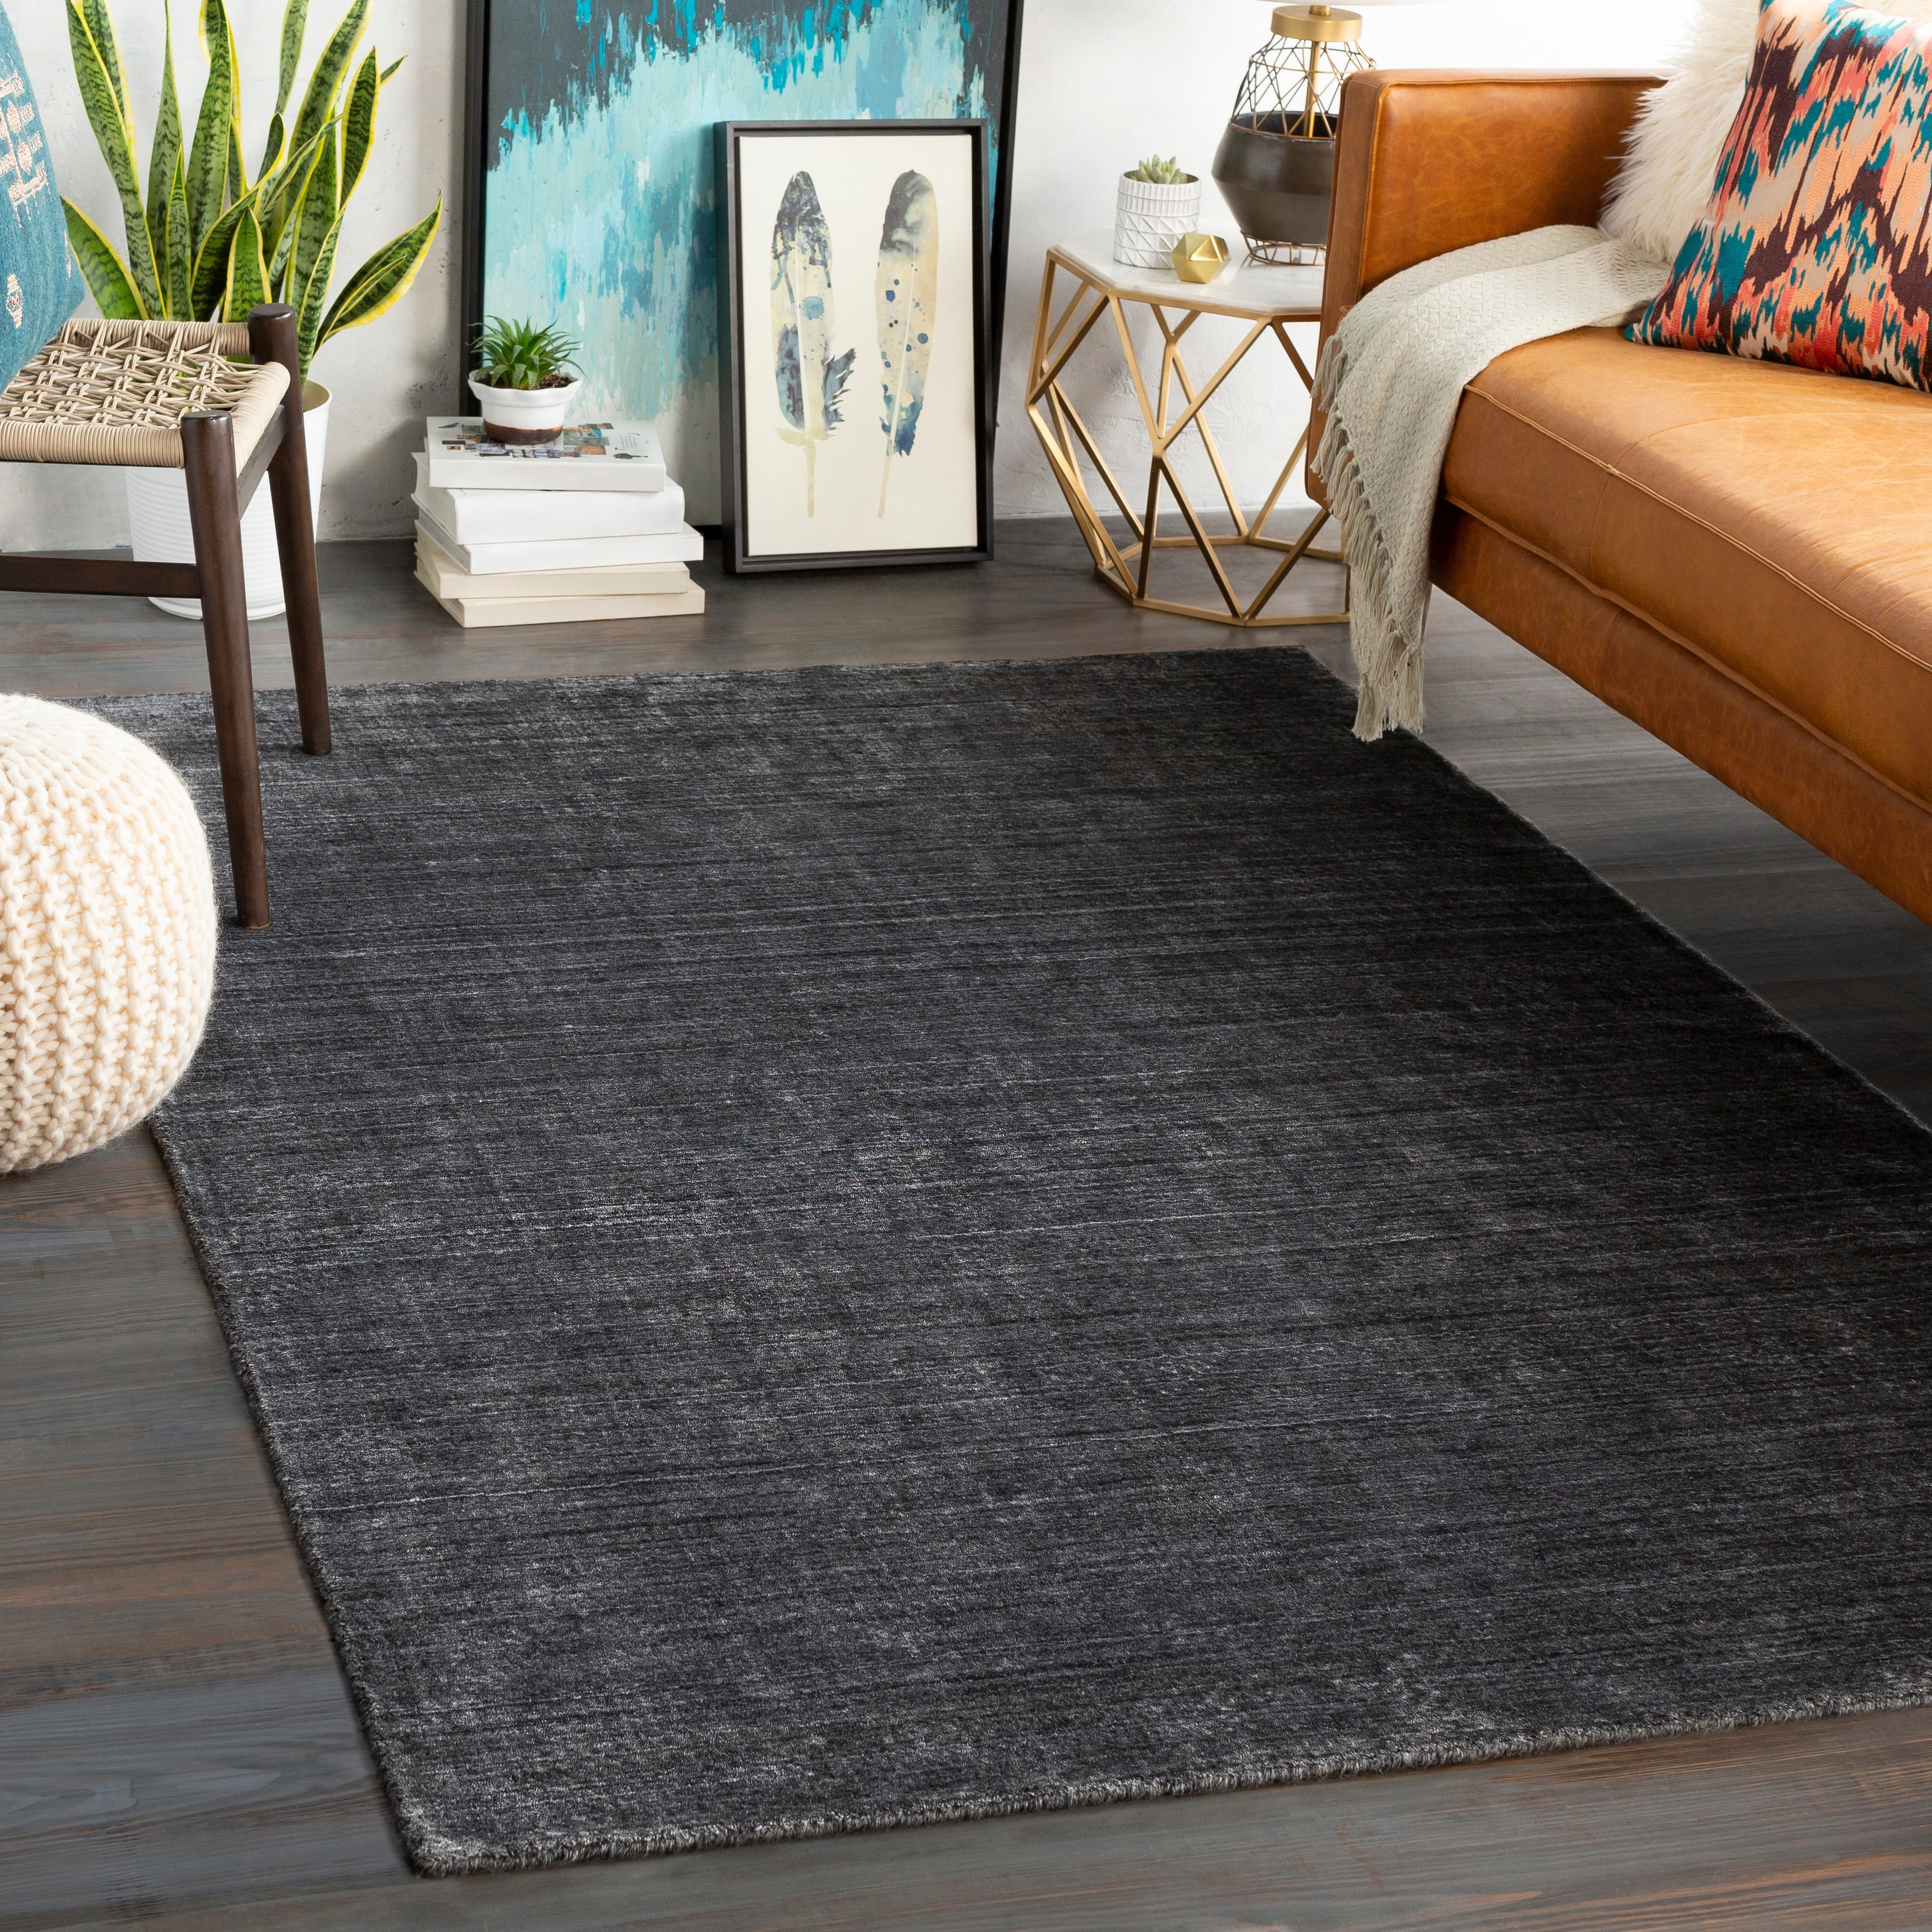 Runner, Hand-Knotted Area Rugs - Bed Bath & Beyond